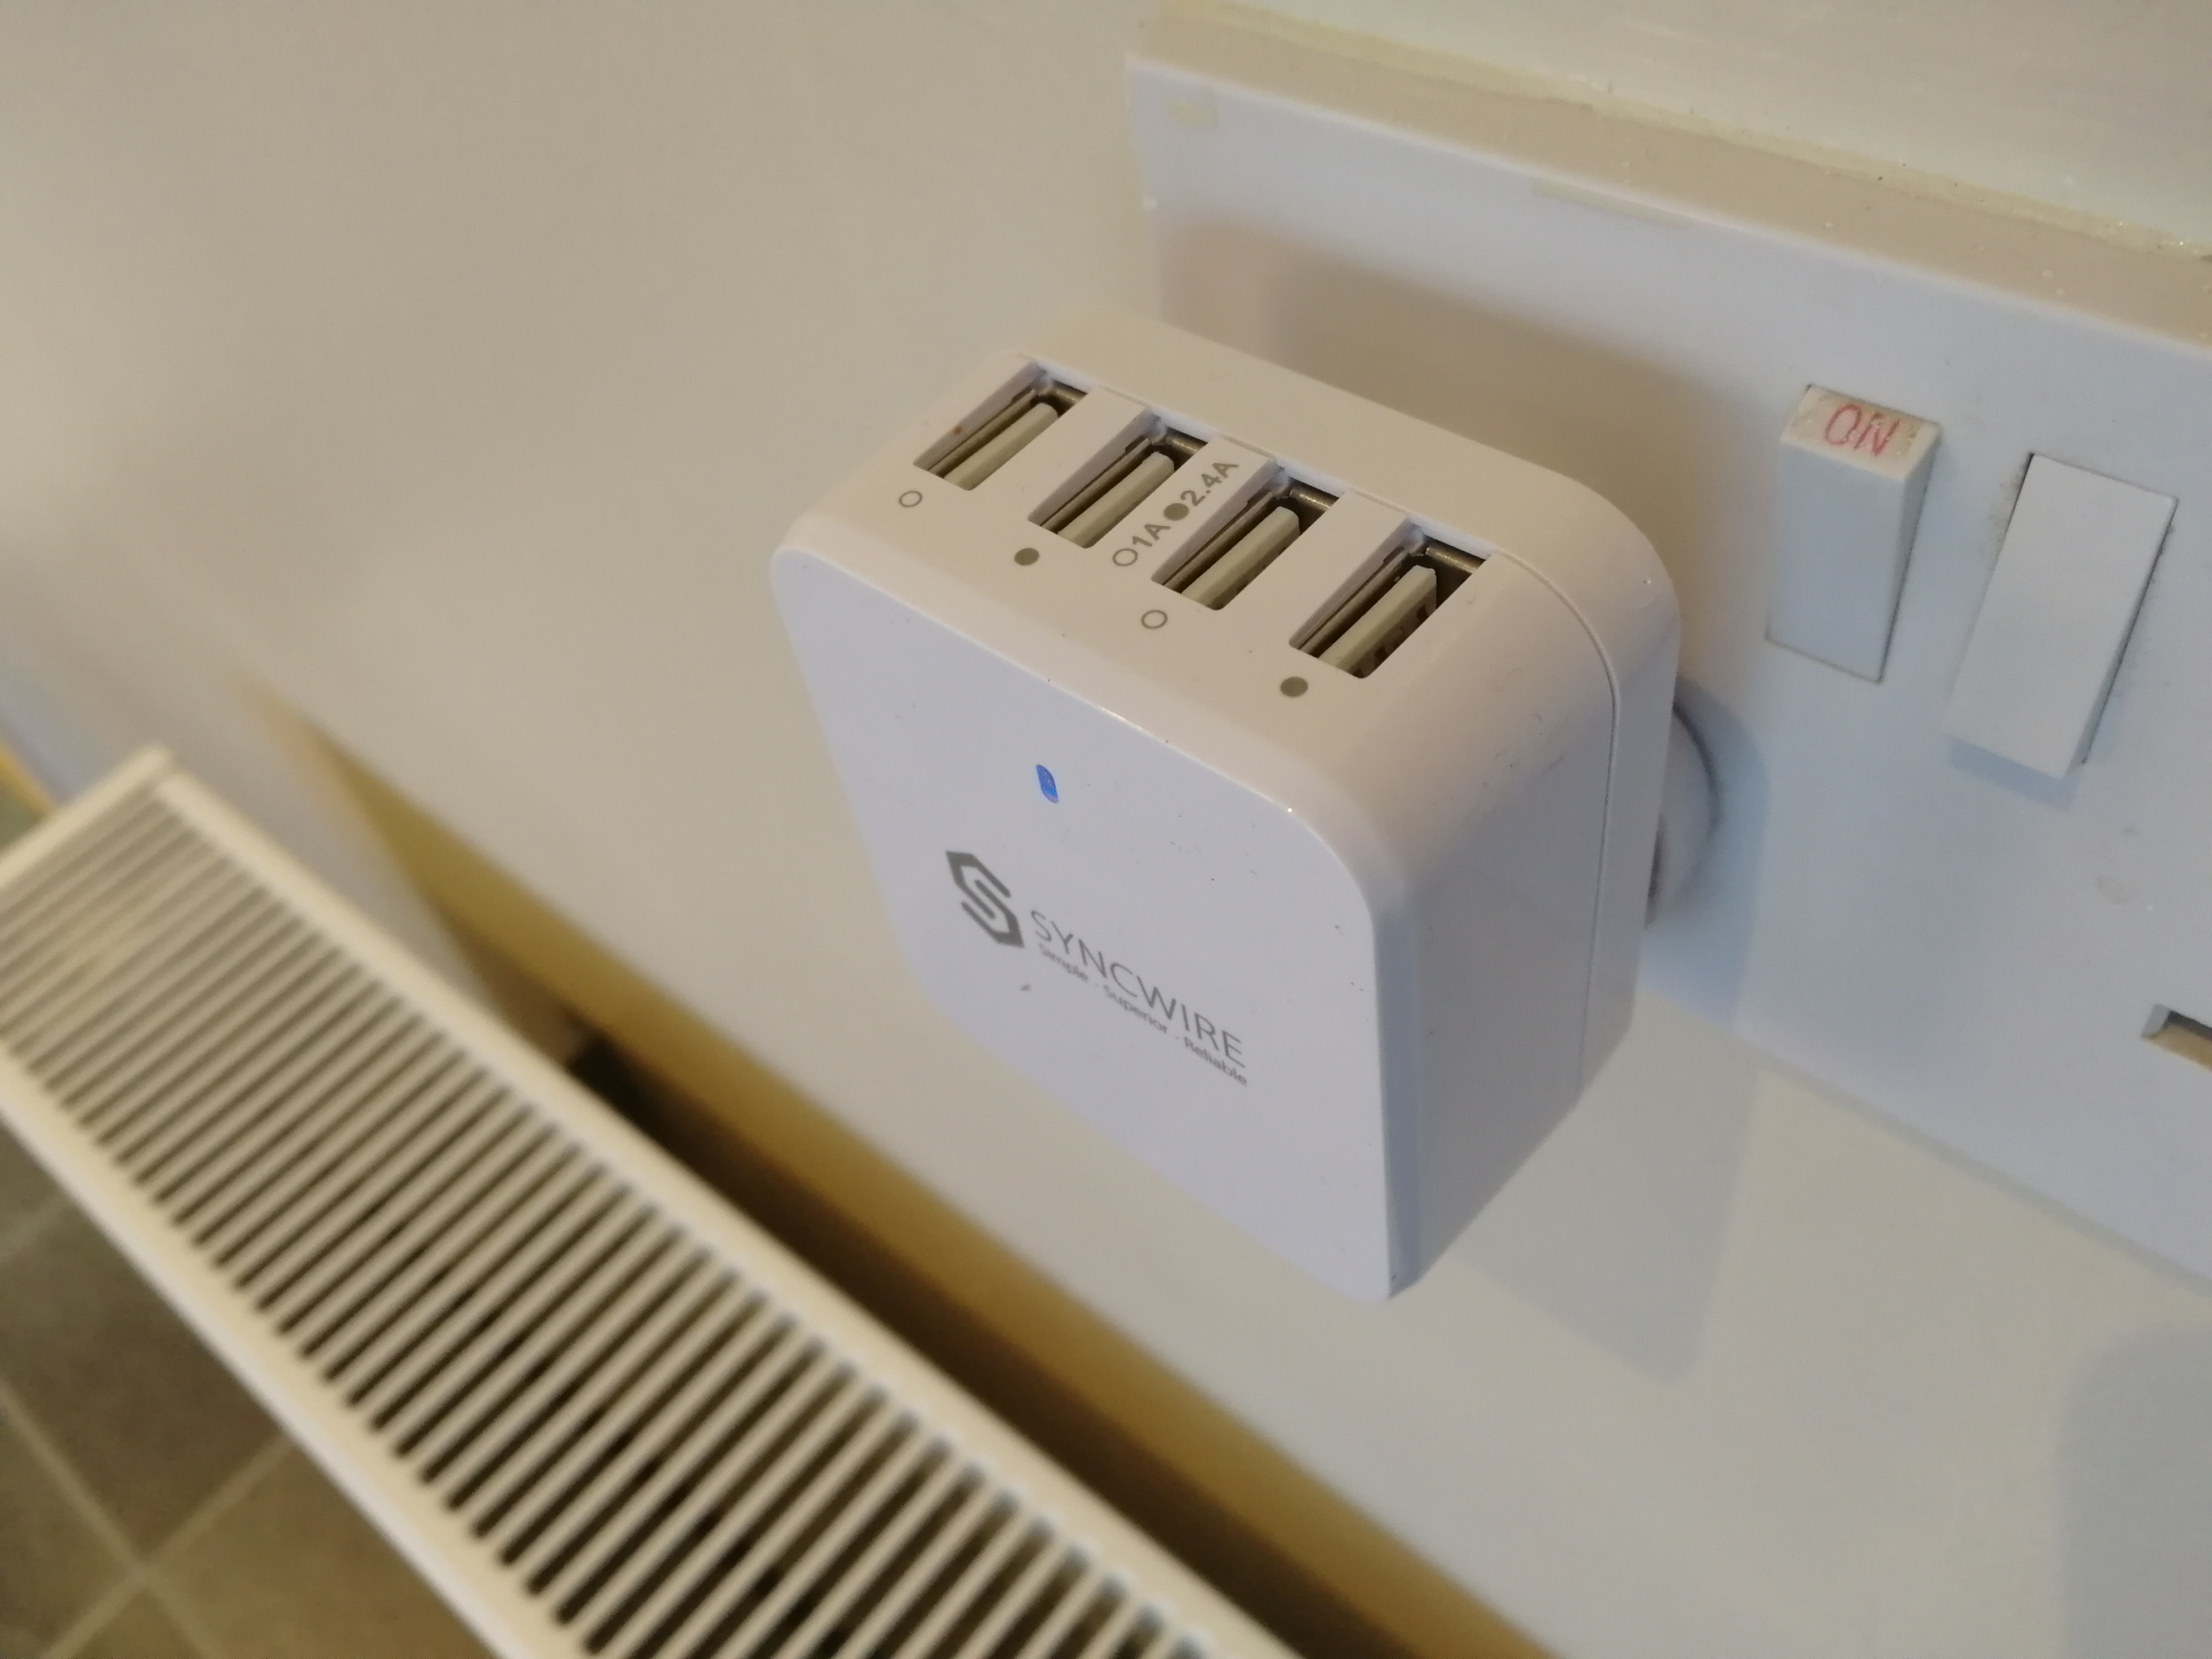 Syncwire 4-Port USB Wall Charger Review (2 Weeks of Use) 